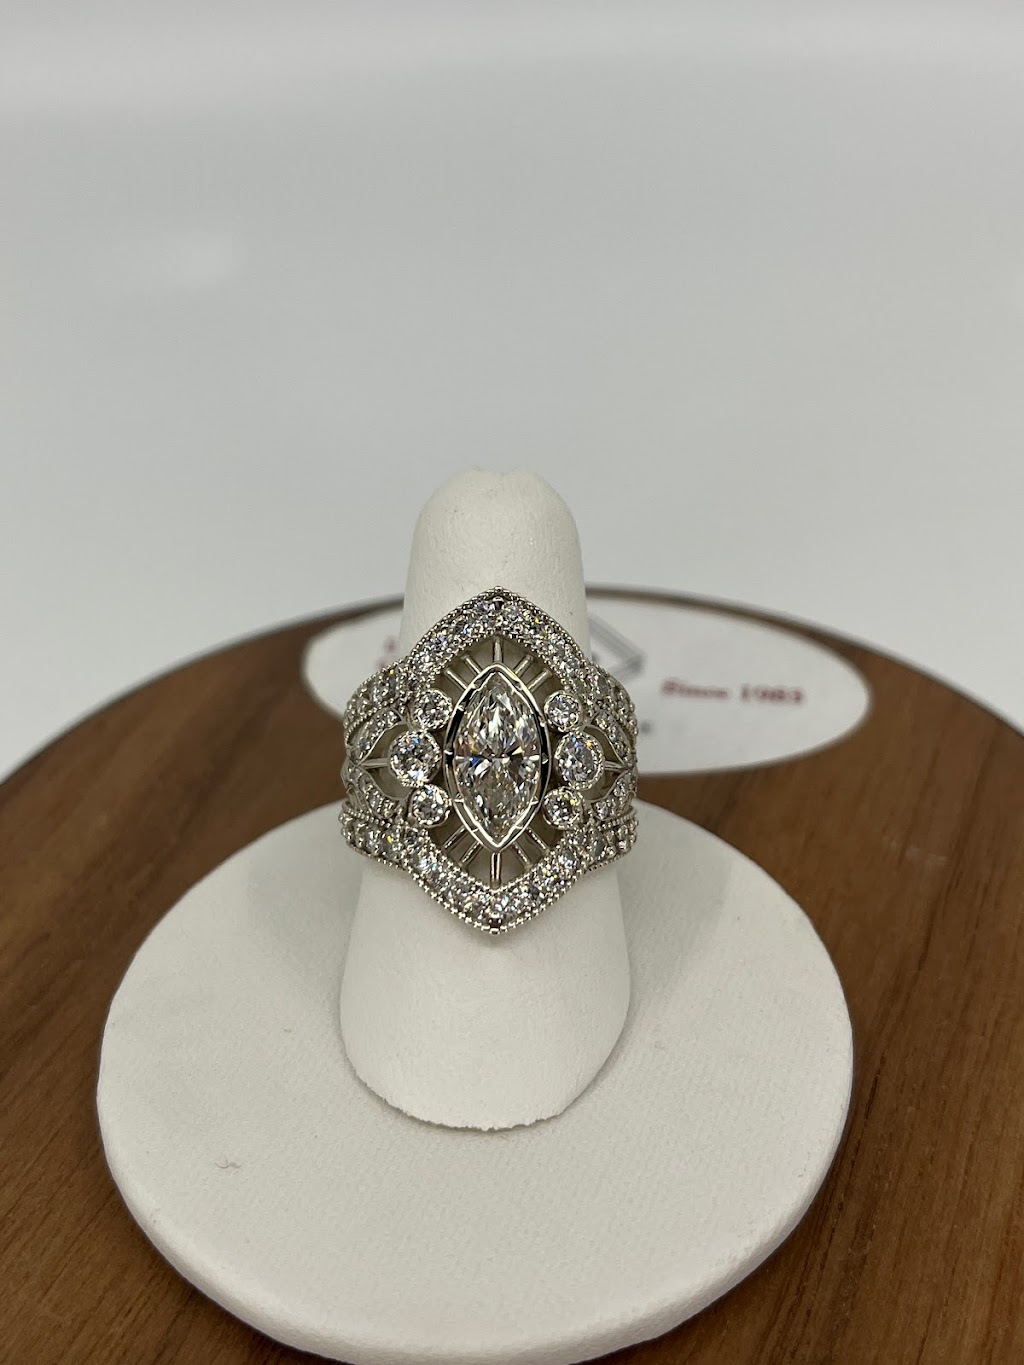 Robert Fine Jewelry | 2050 Western Ave suite 110, Guilderland, NY 12084 | Phone: (518) 464-6640